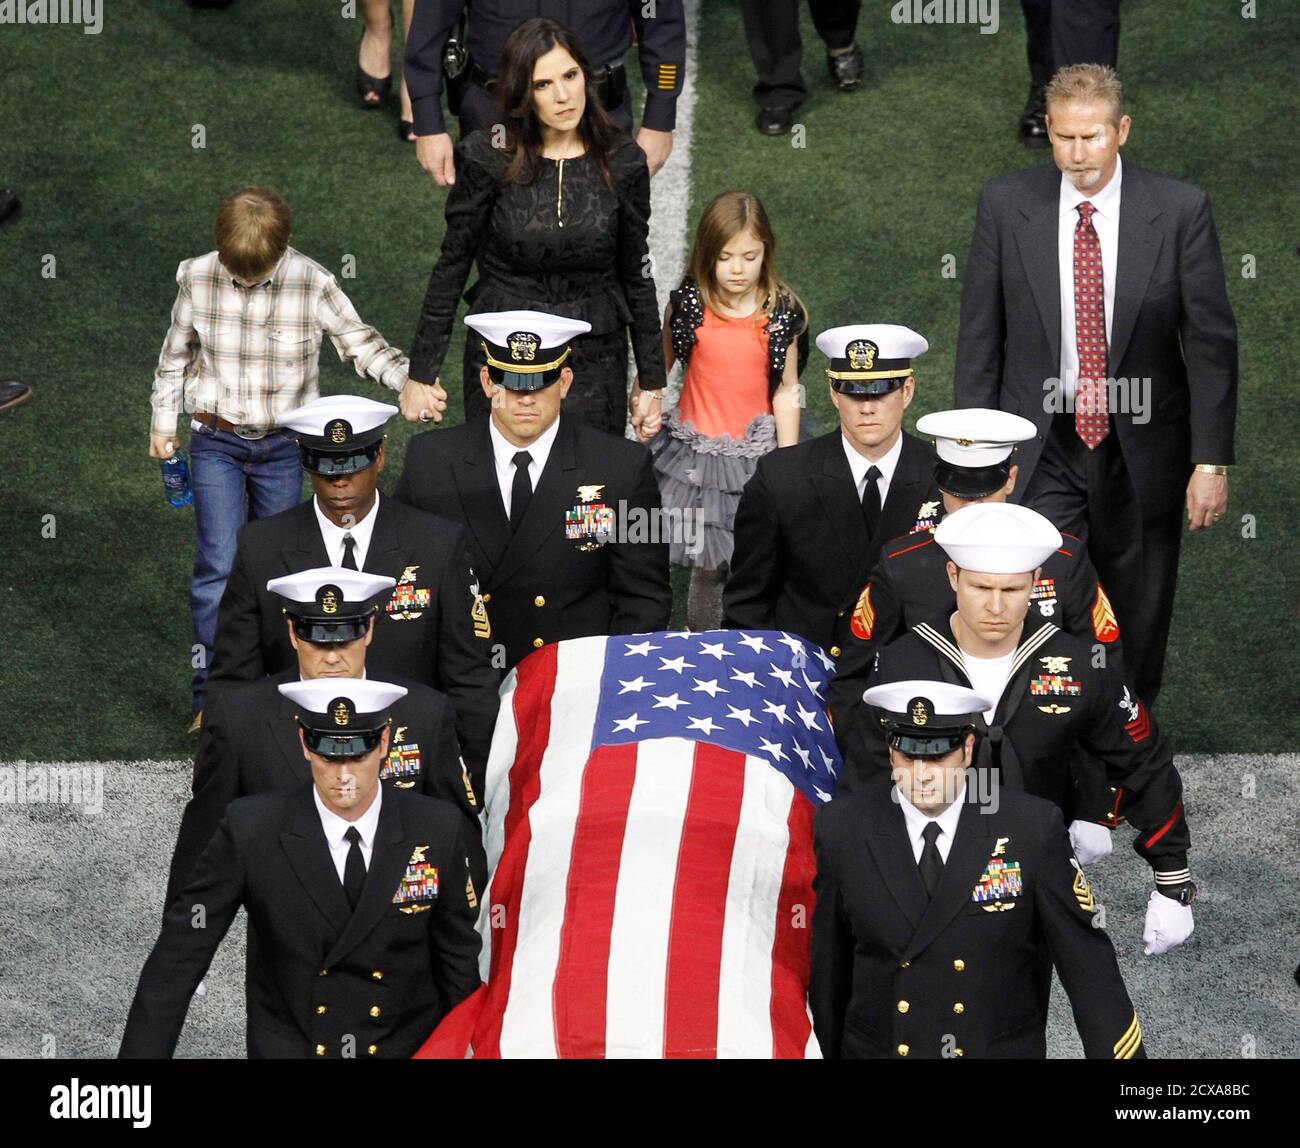 Taya Kyle (rear) and her children walk behind the coffin of her slain  husband former Navy SEAL Chris Kyle during a memorial service for the  former sniper at Cowboys Stadium in Arlington,